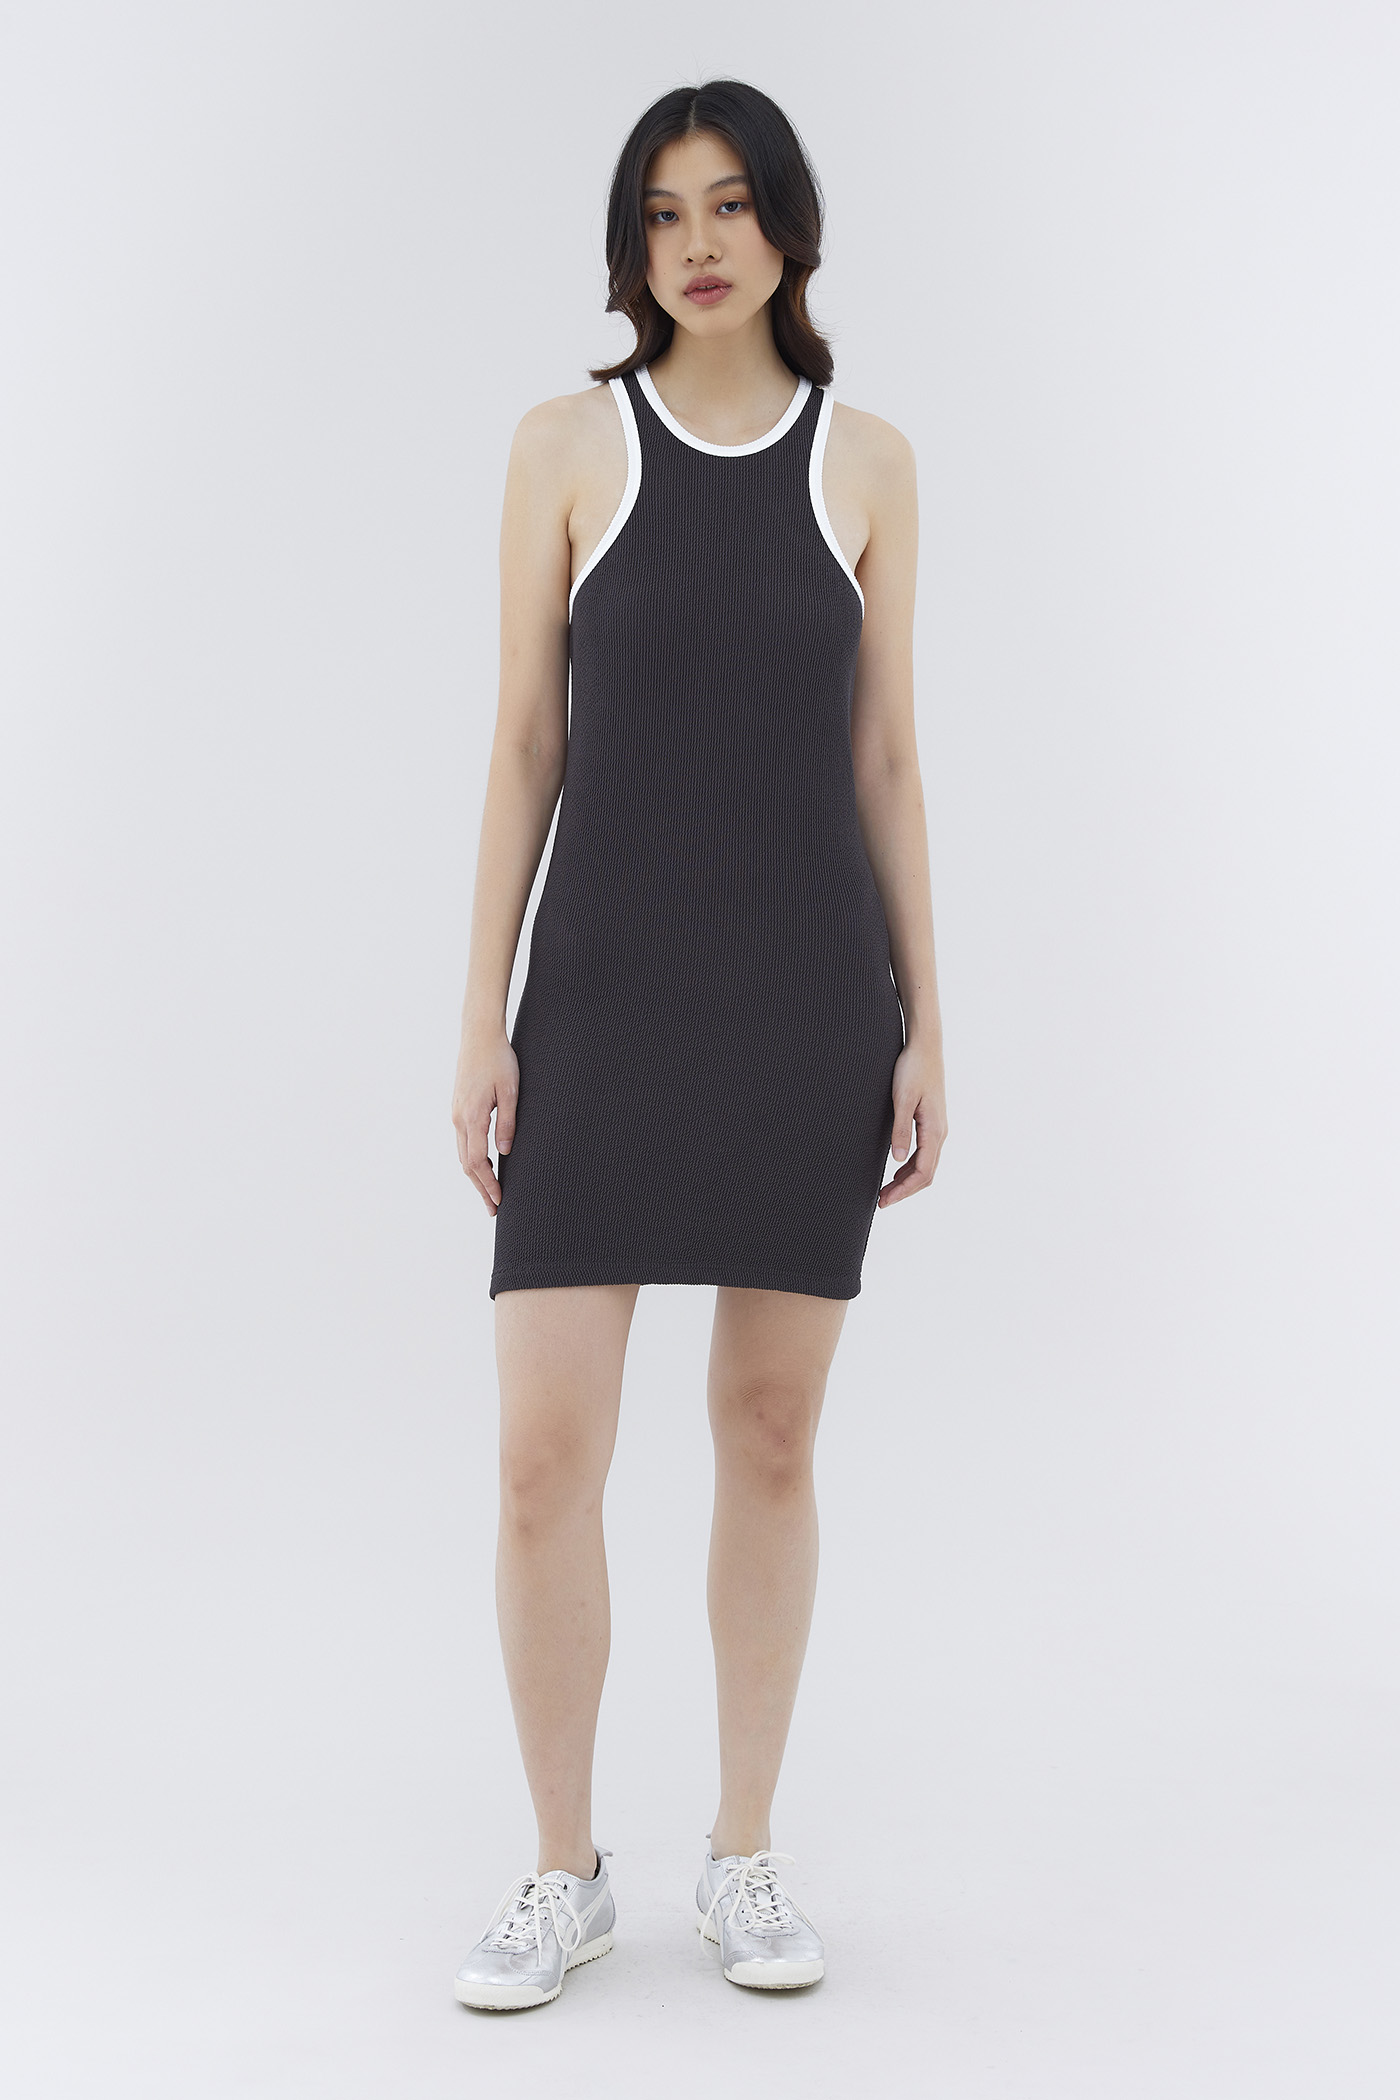 Tiare Racer Fitted Dress